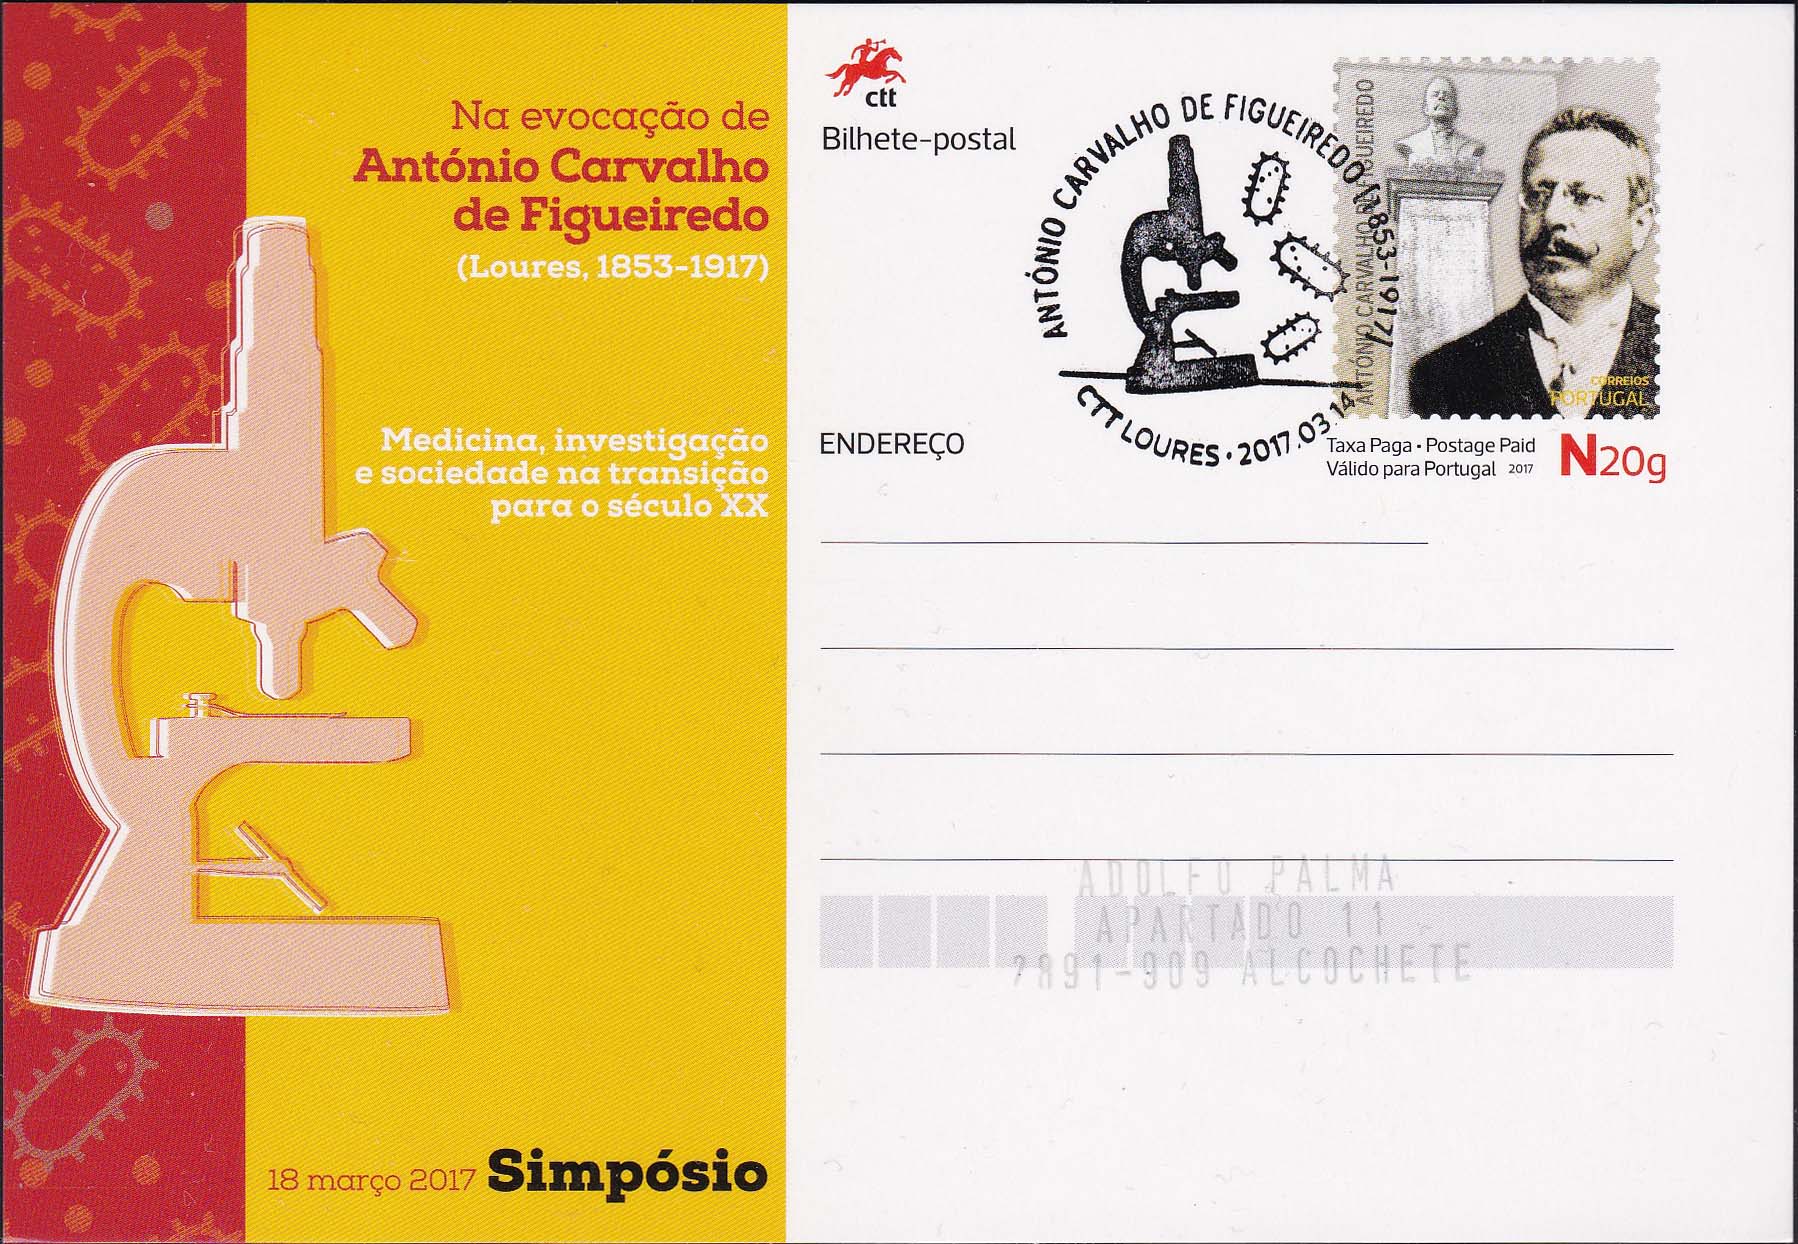 Portugal Figueiredo Postal Card First Day Cover